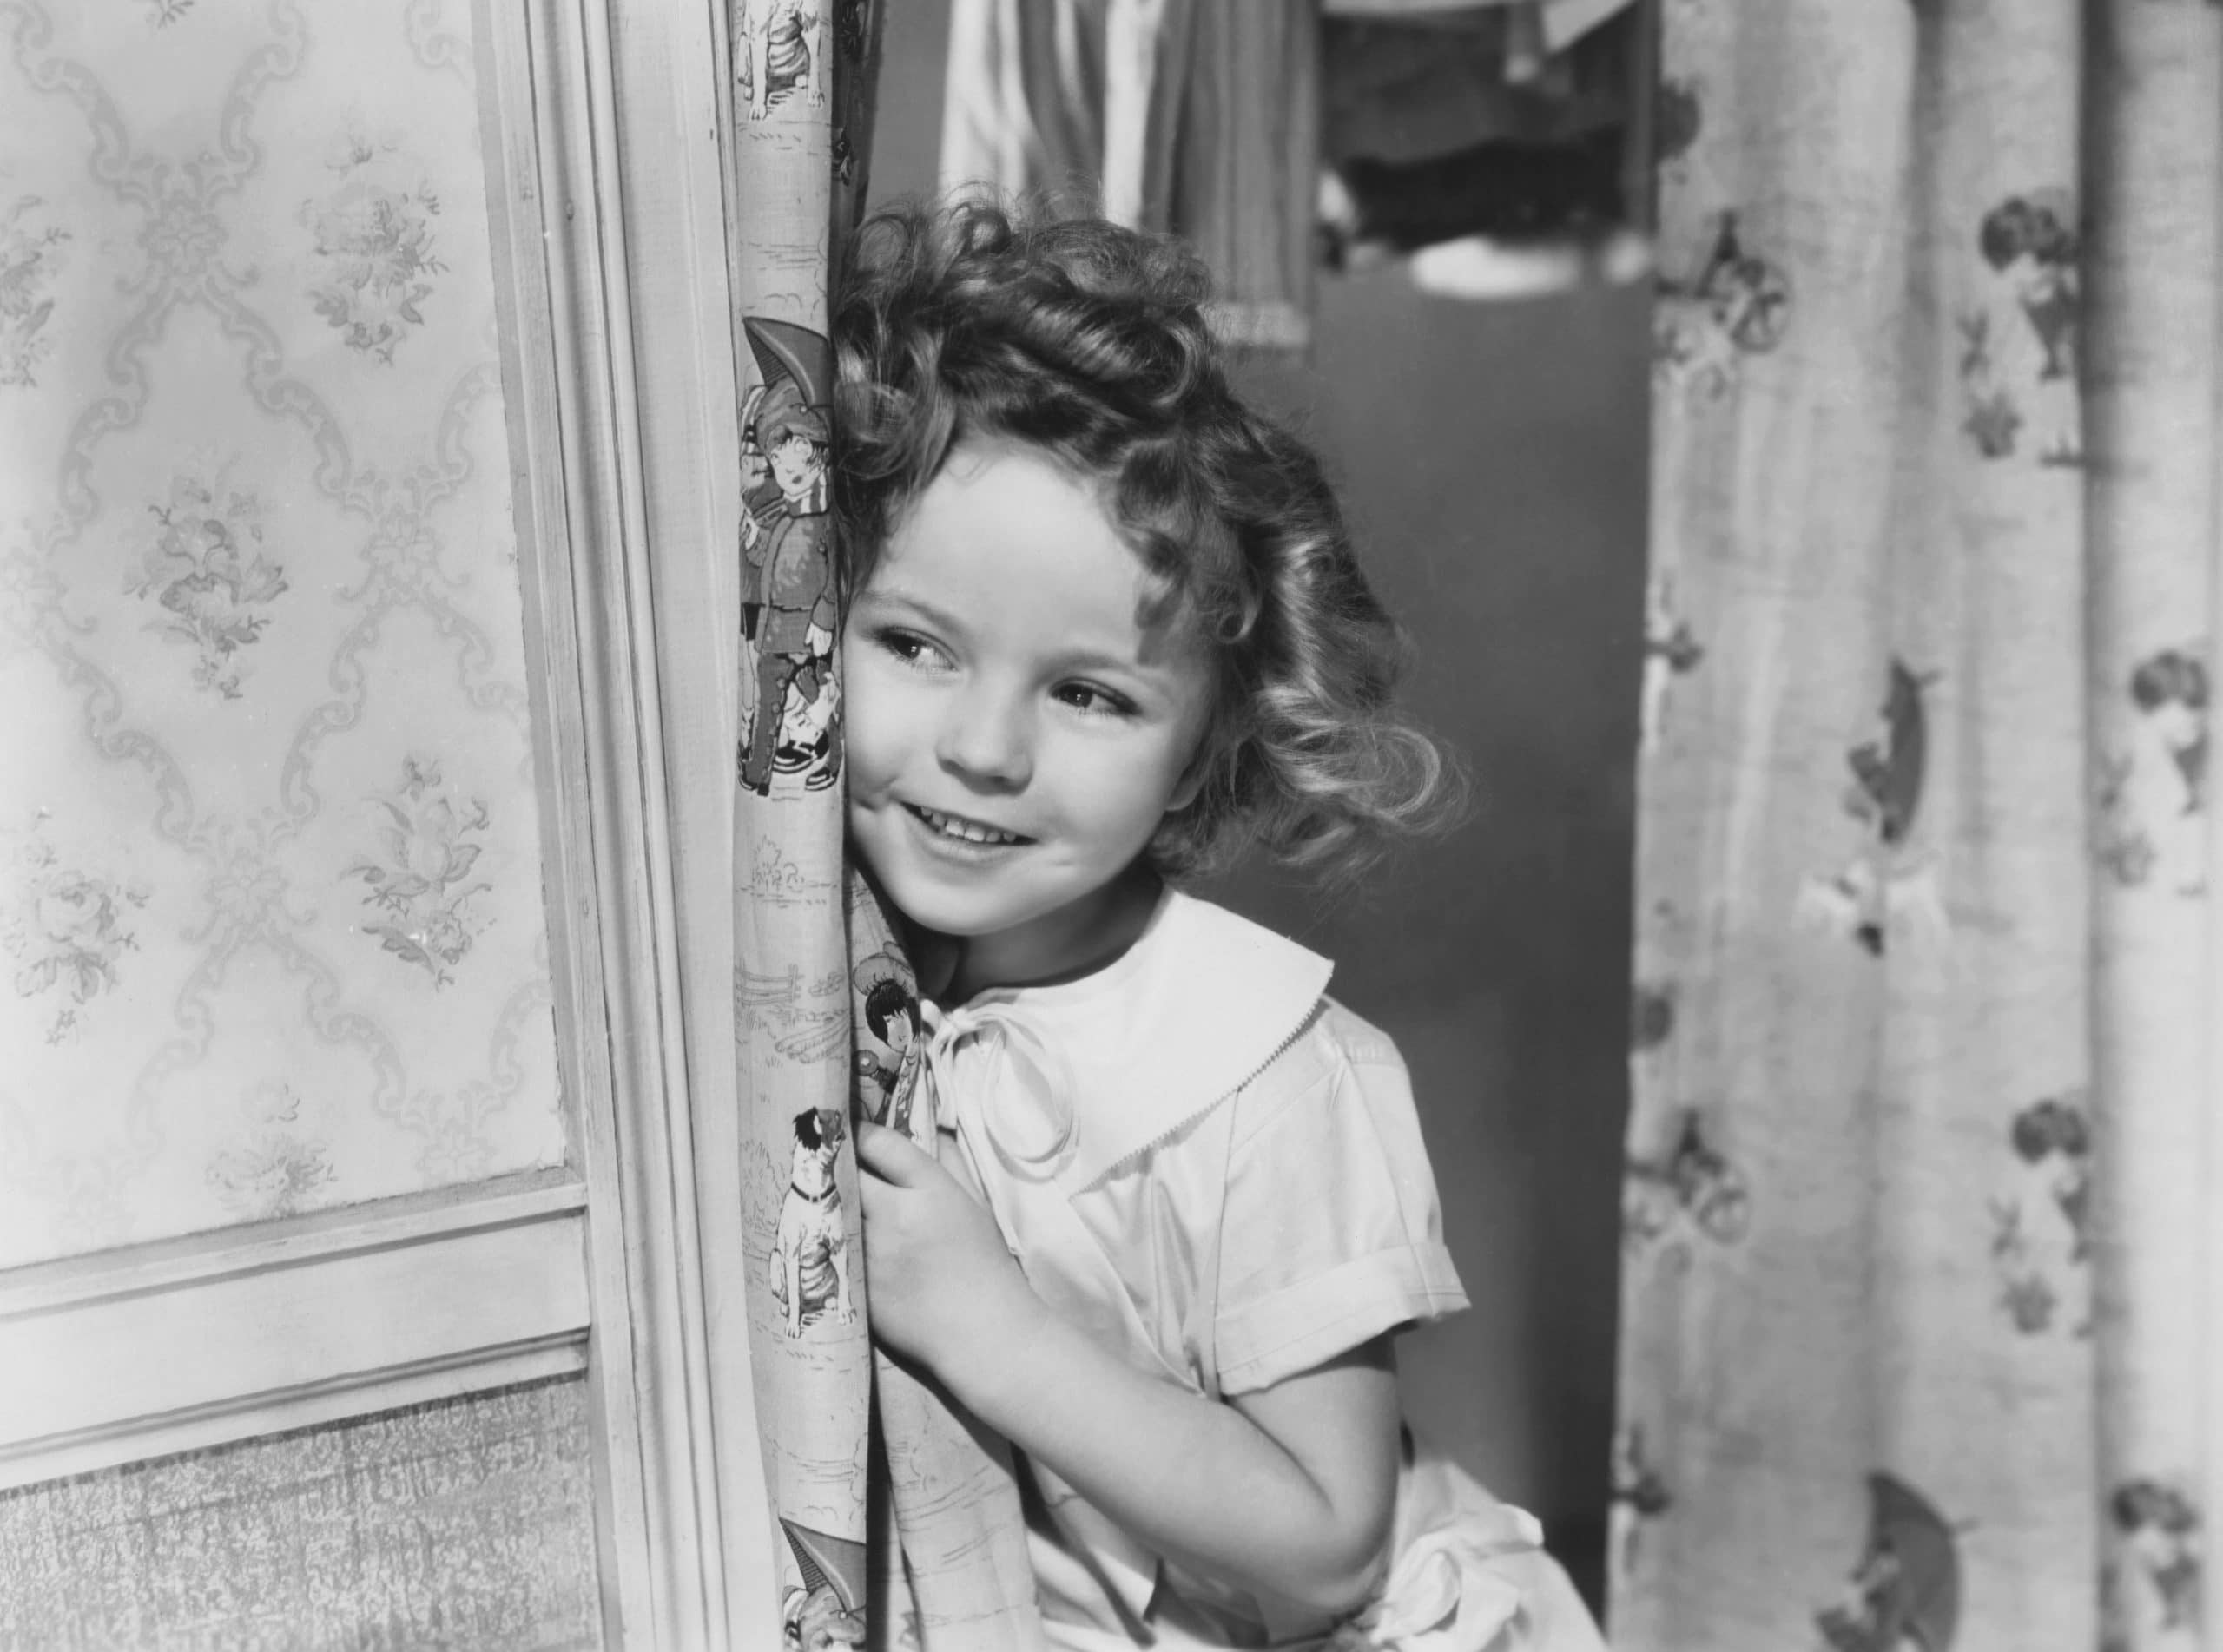 shirley temple